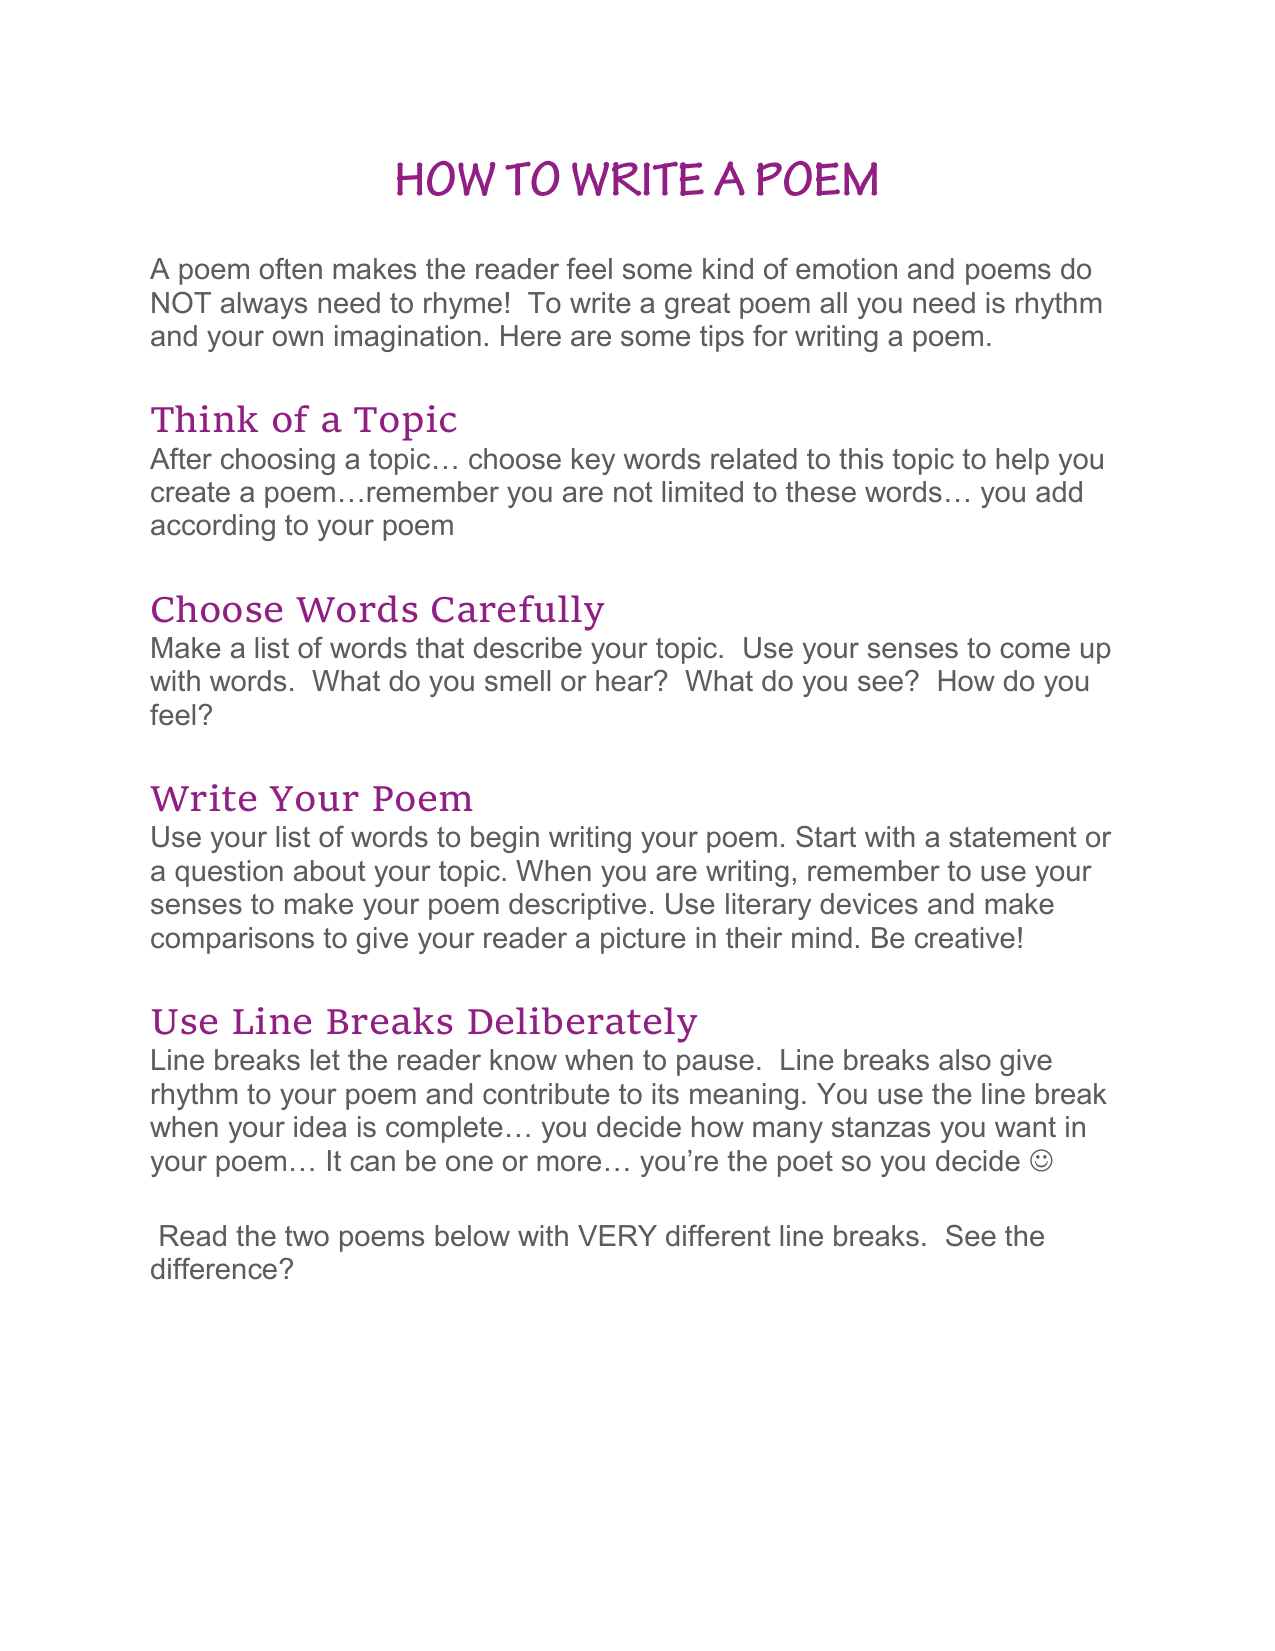 HOW TO WRITE A POEM